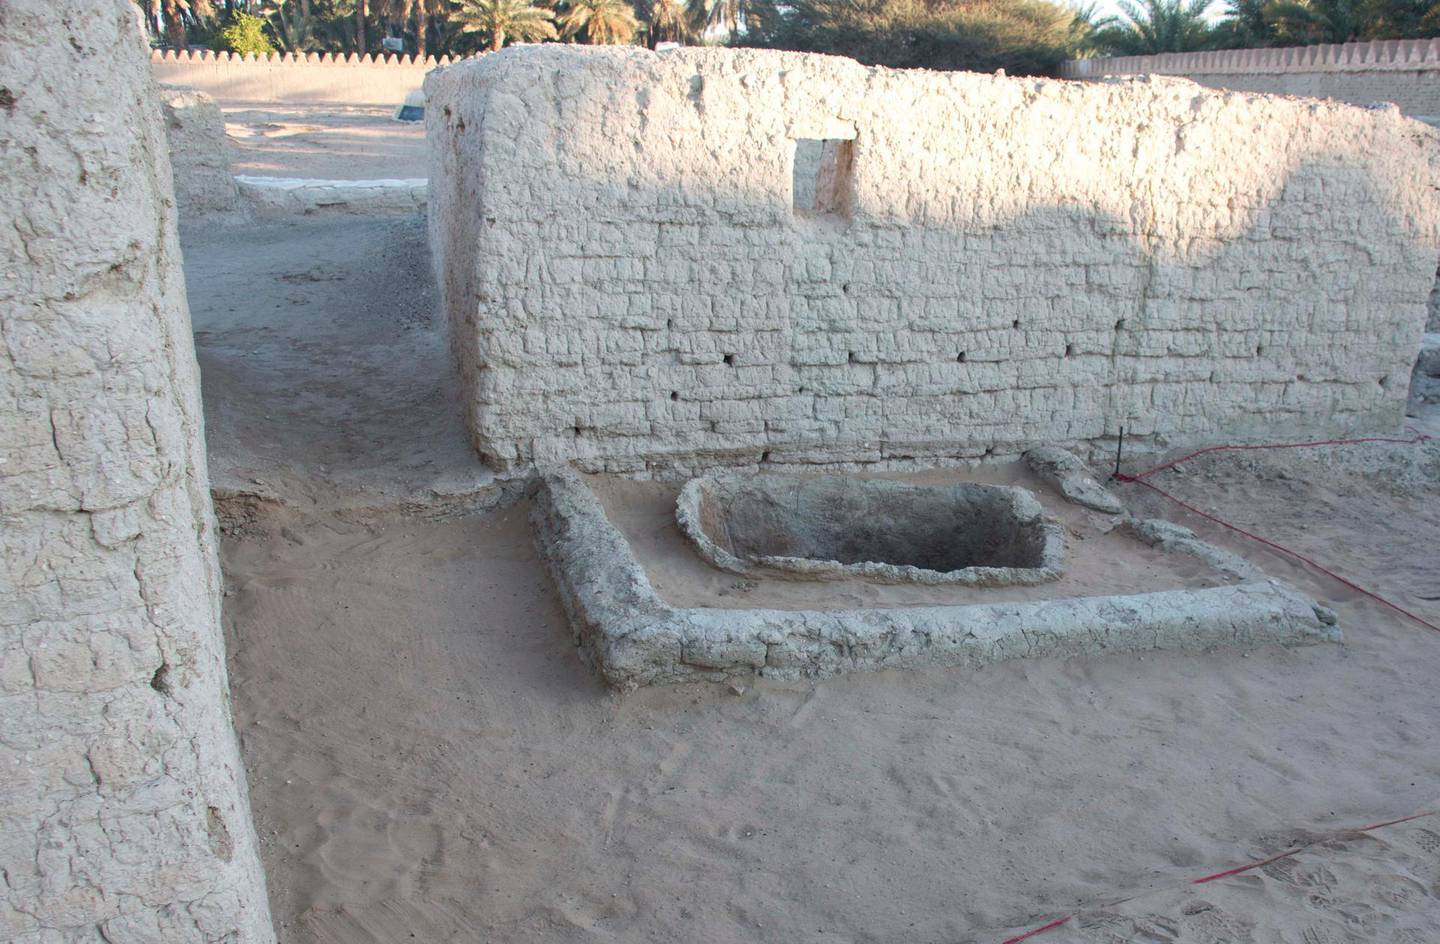 Homes excavated in Hili 2 in Al Ain. Courtesy Department of Culture and Tourism - Abu Dhabi